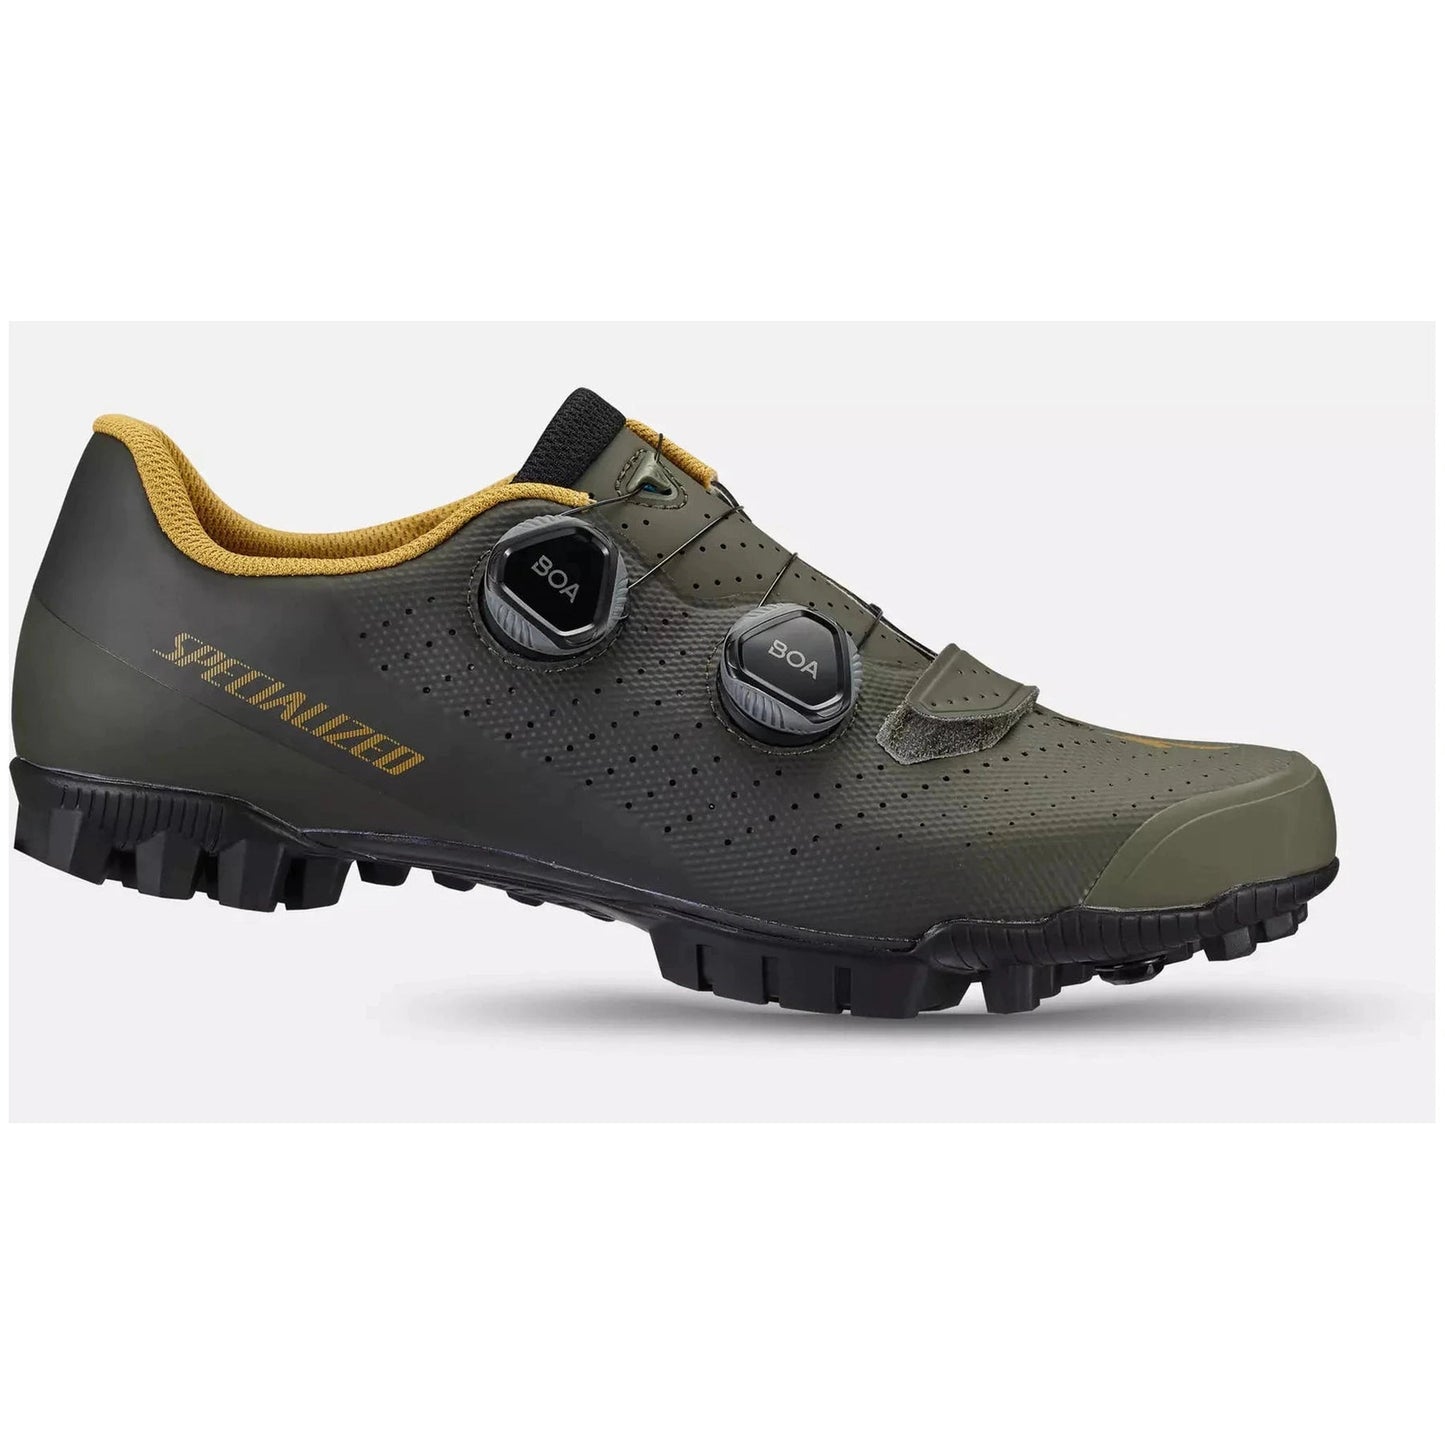 Recon 3.0 Mountain Bike Shoes-Cycles Direct Specialized